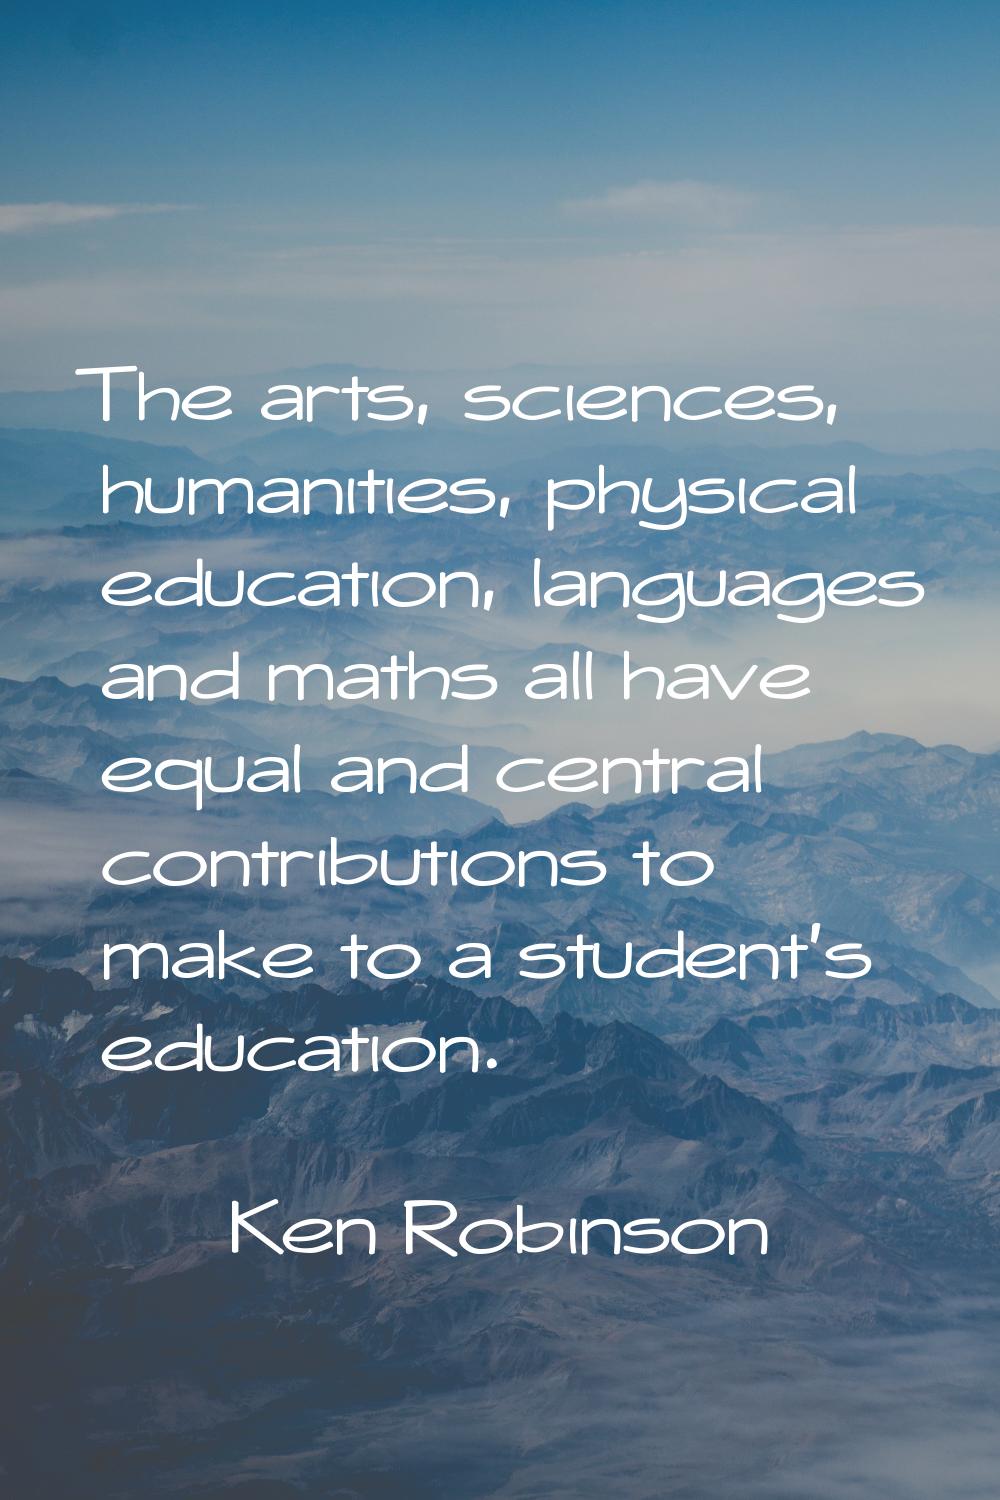 The arts, sciences, humanities, physical education, languages and maths all have equal and central 